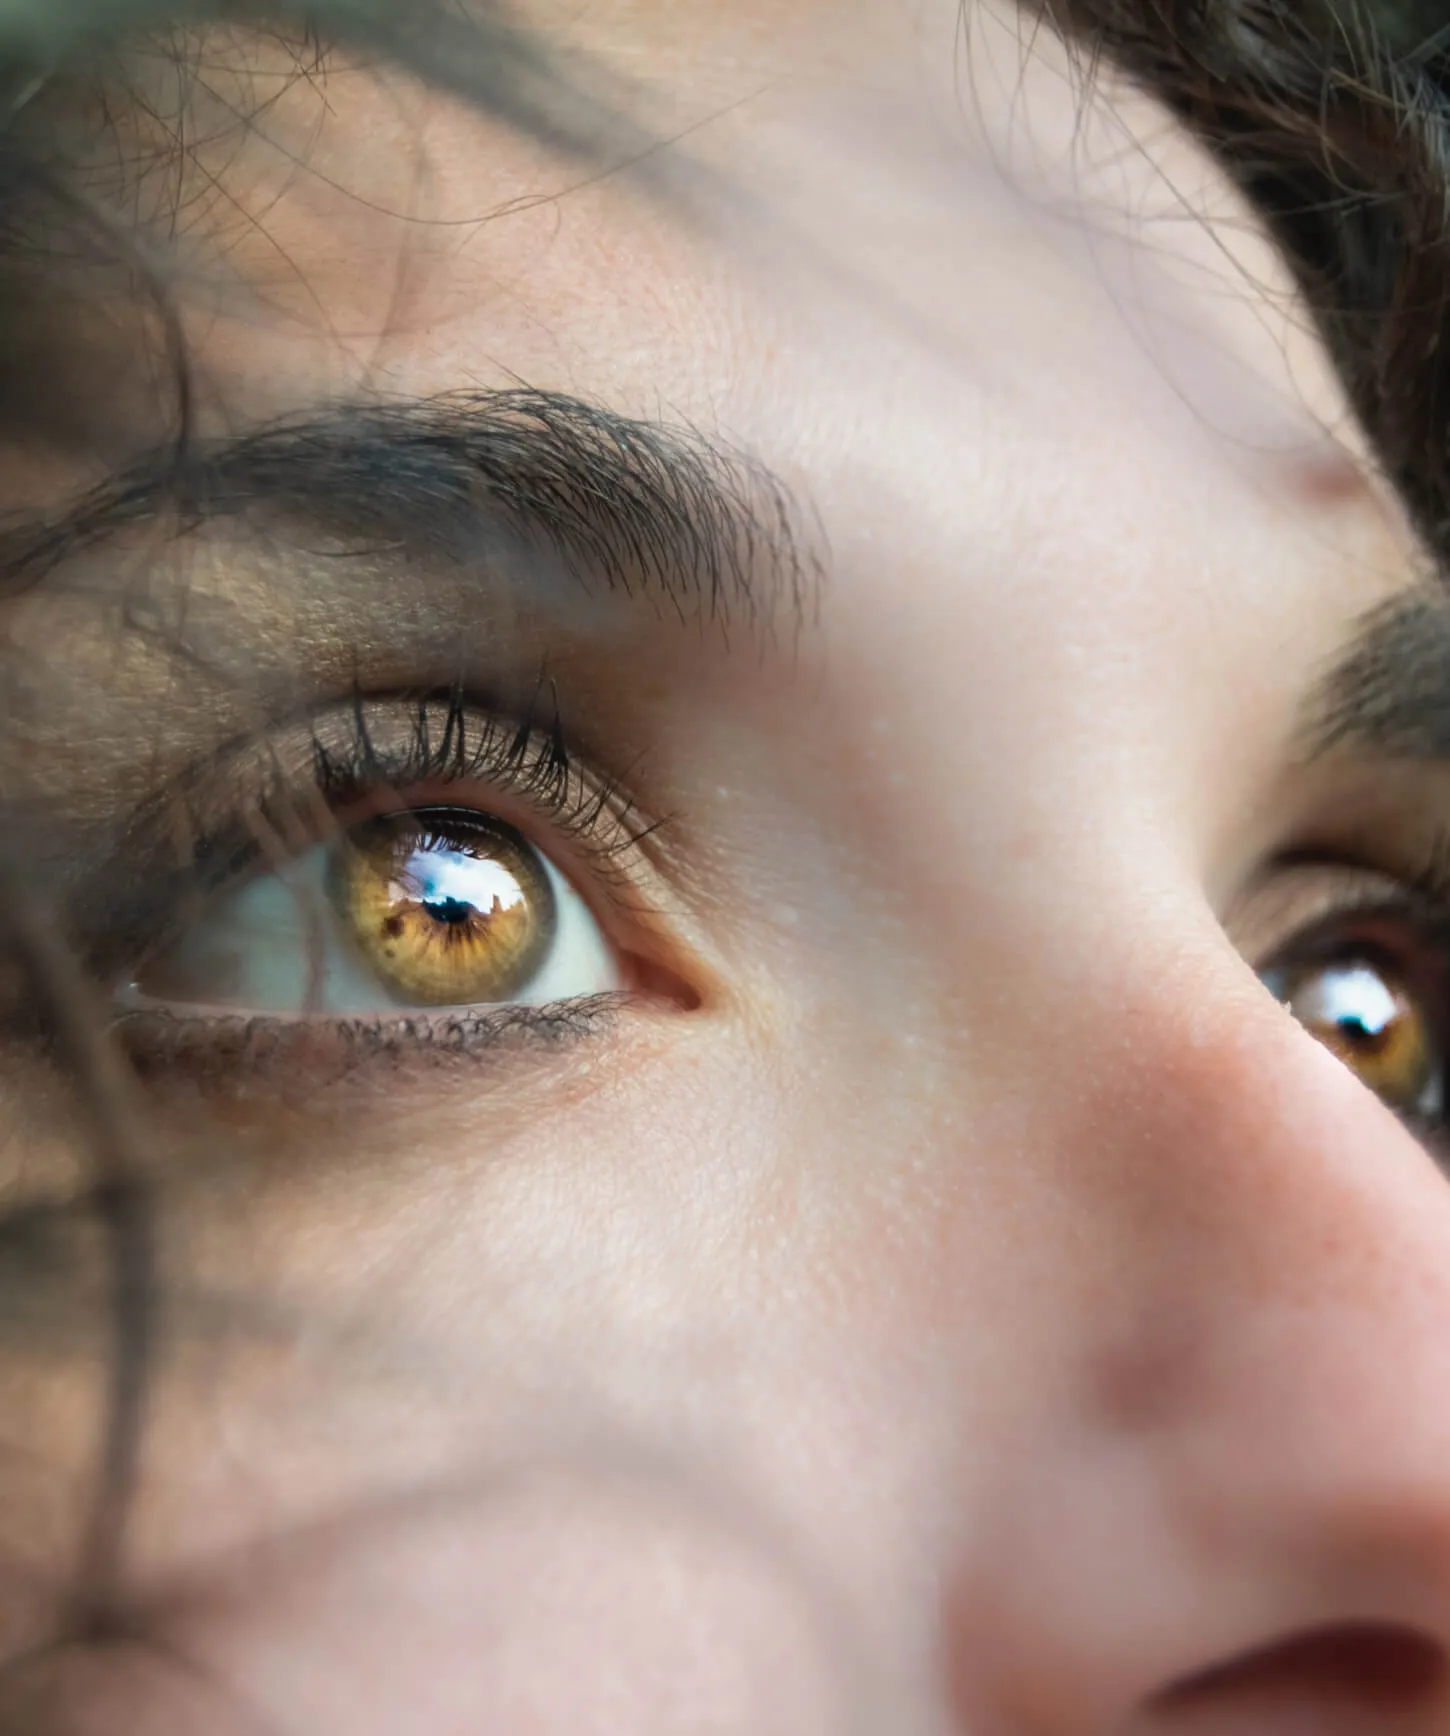 An image of a woman looking into the sky, with a close-up onto her eye